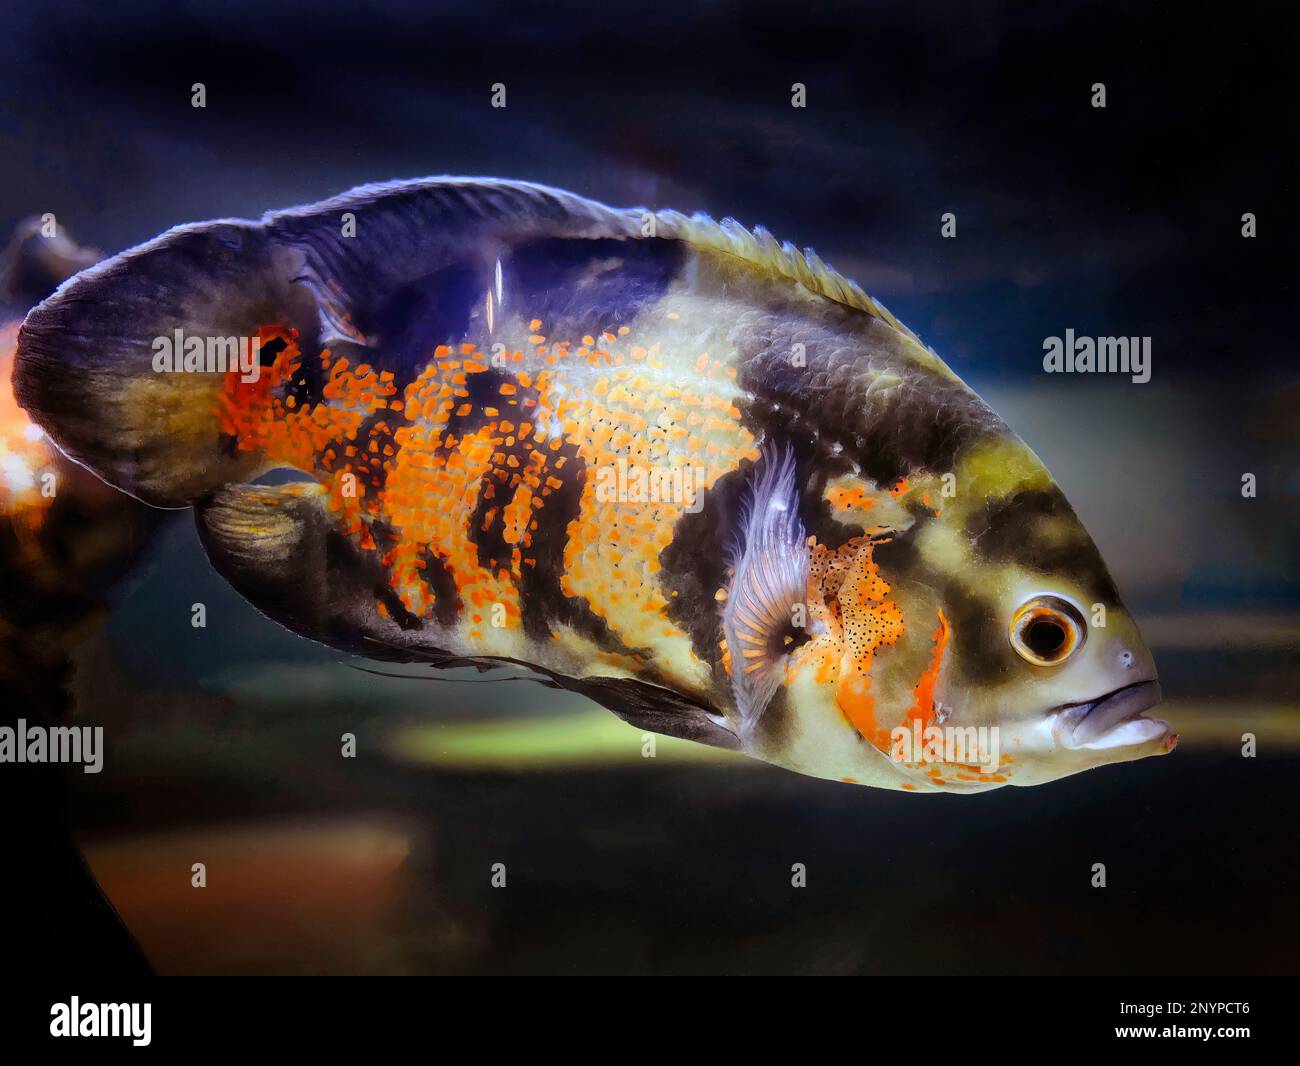 An Oscar fish, Red velvet, Cichlid, warm color tone, orange black mottled color, swimming in the tank underwater with blurred background, Phuket aquar Stock Photo